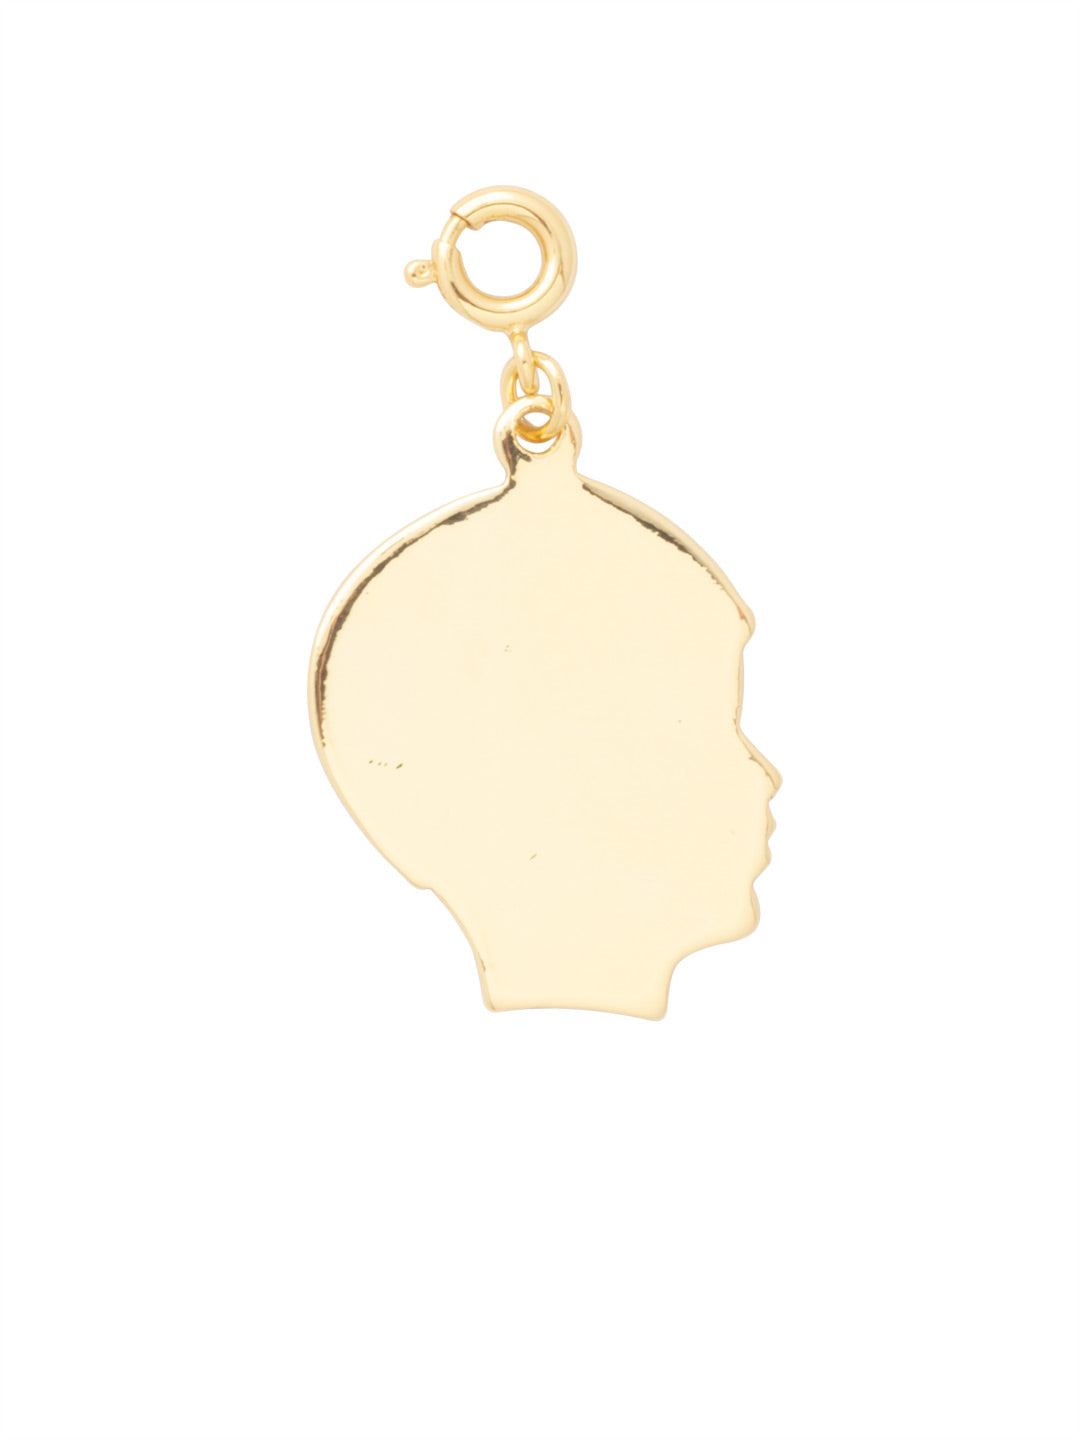 Product Image: Boy Silhouette Charm